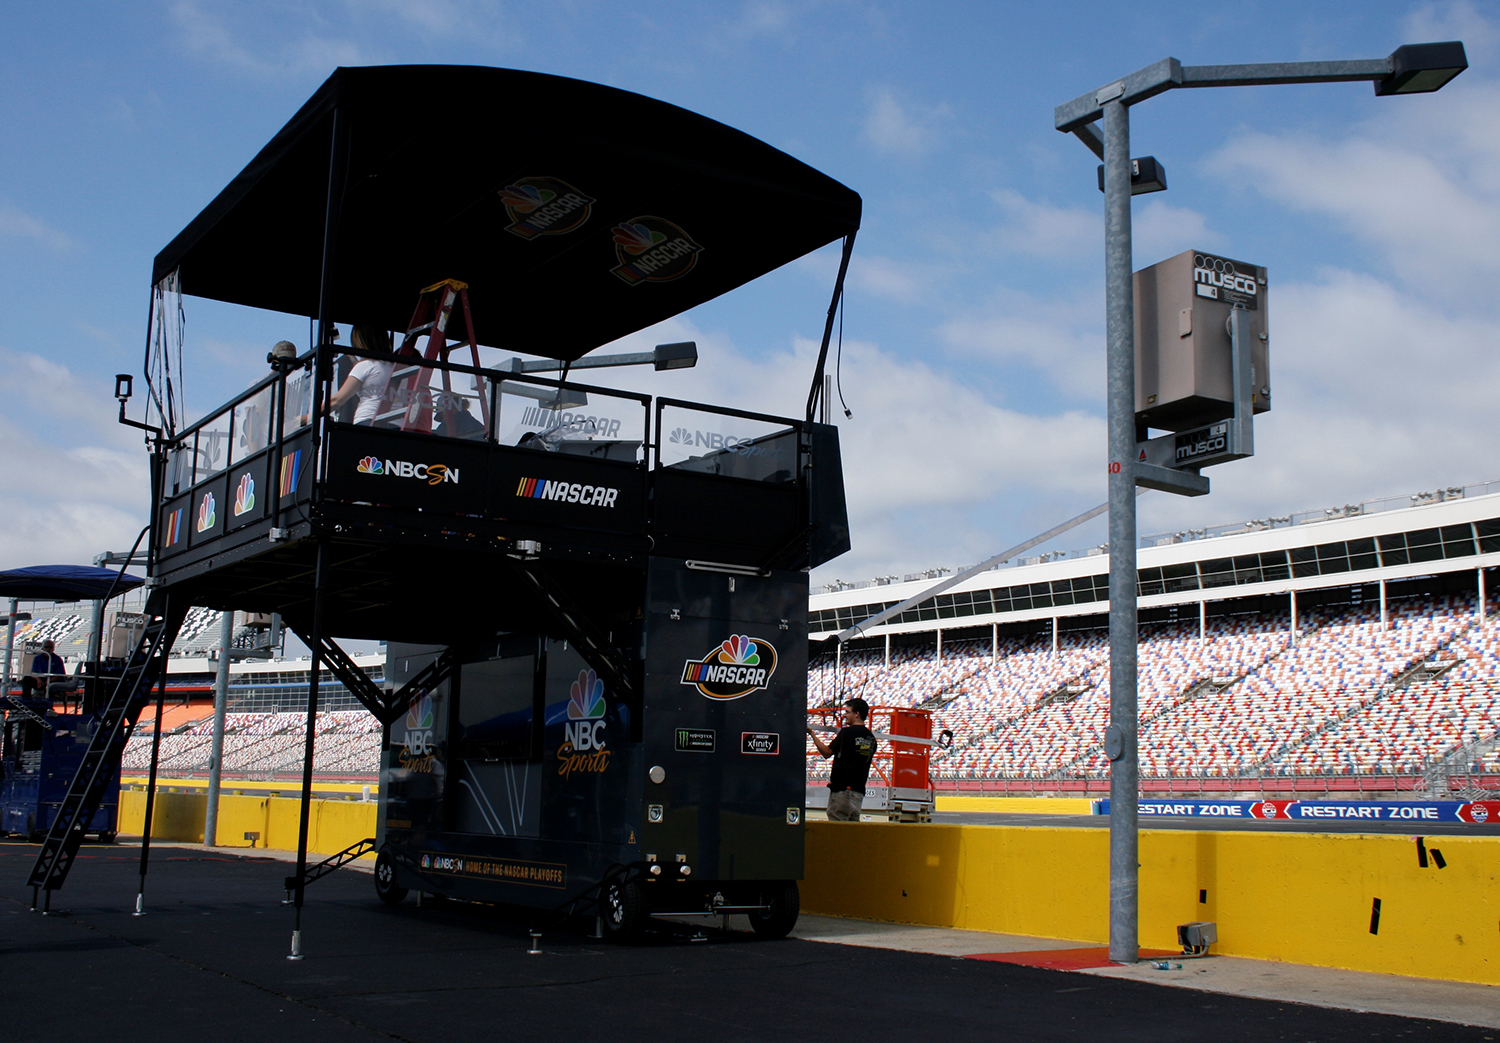 NBC Sports Spreads Its Tech Feathers With New Peacock Pit Box on NASCAR Coverage